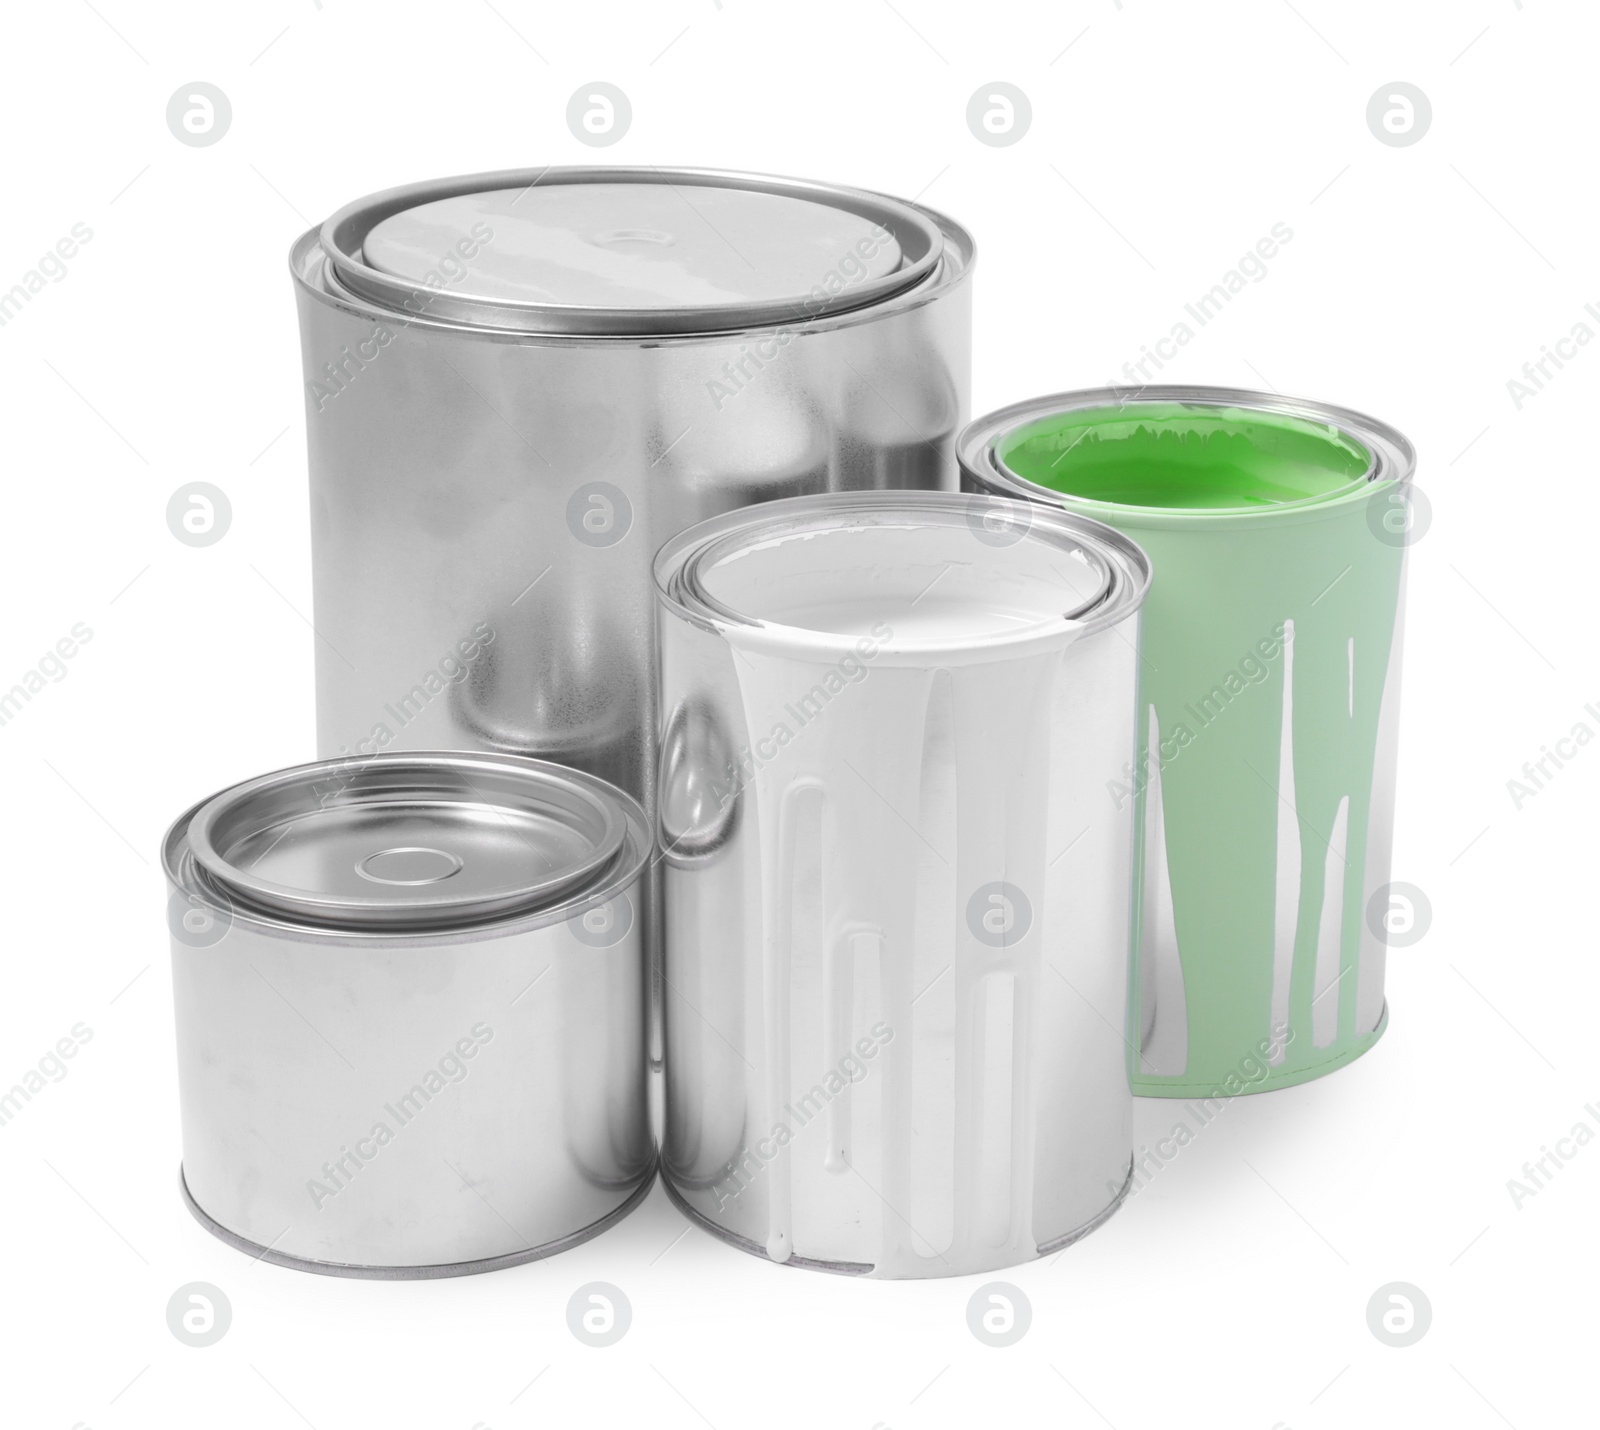 Photo of Cans of different paints isolated on white